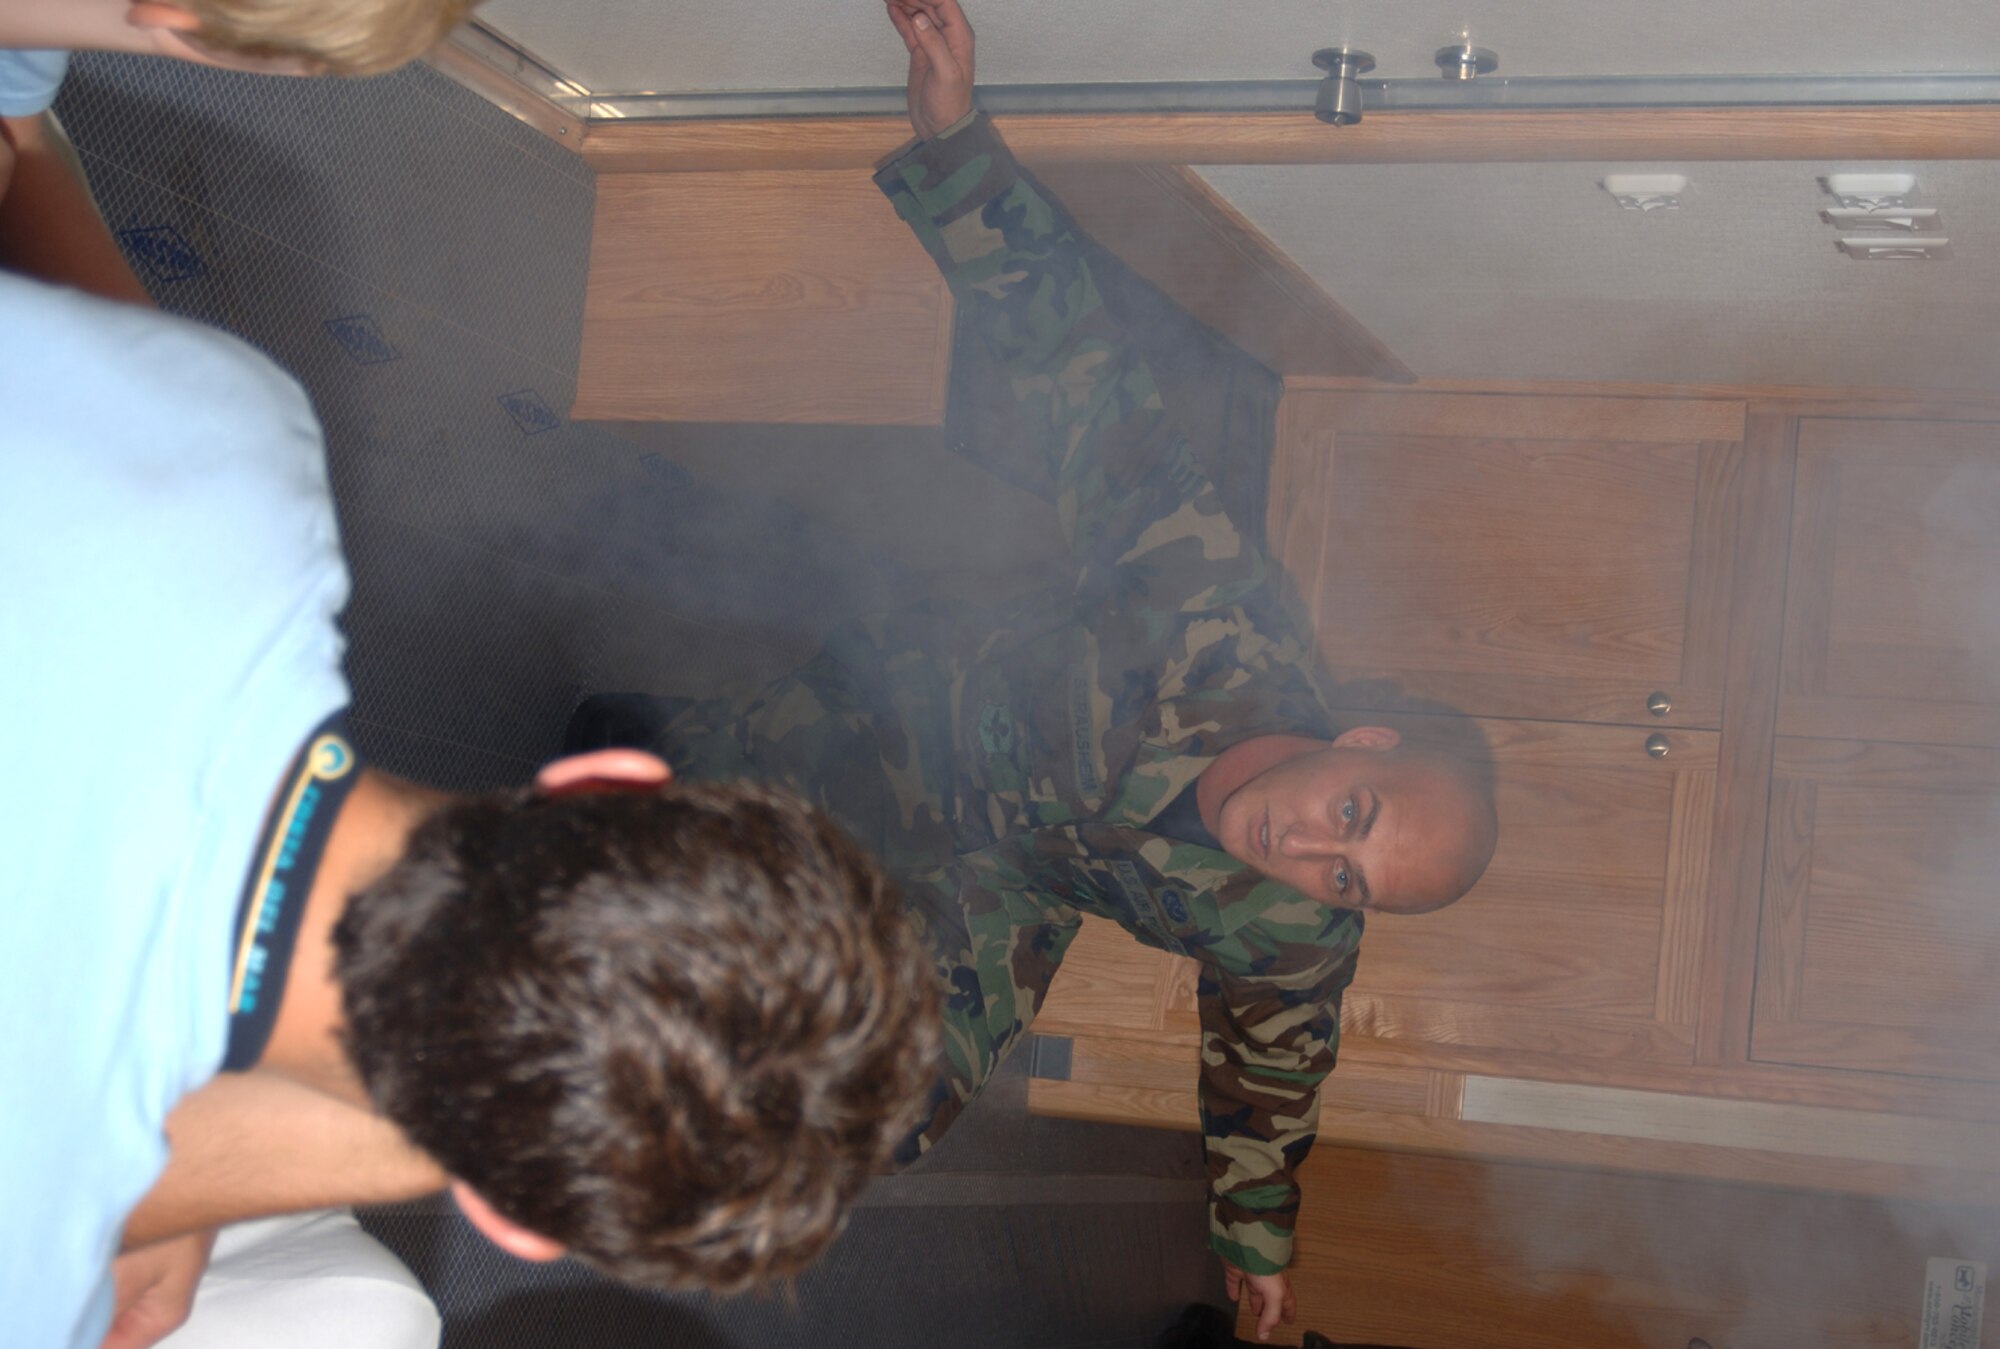 Staff Sgt. Darnell Strauheim, 14th Civil Engineer Squadron, demonstrates fire prevention techniques Friday to a group of youth. CAFB has recently received a Fire Prevention Trailer to educate the BLAZE Team on the best ways to react during a houshold fire. (U.S. Air Force Photo by Airman 1st Class Danielle Powell)